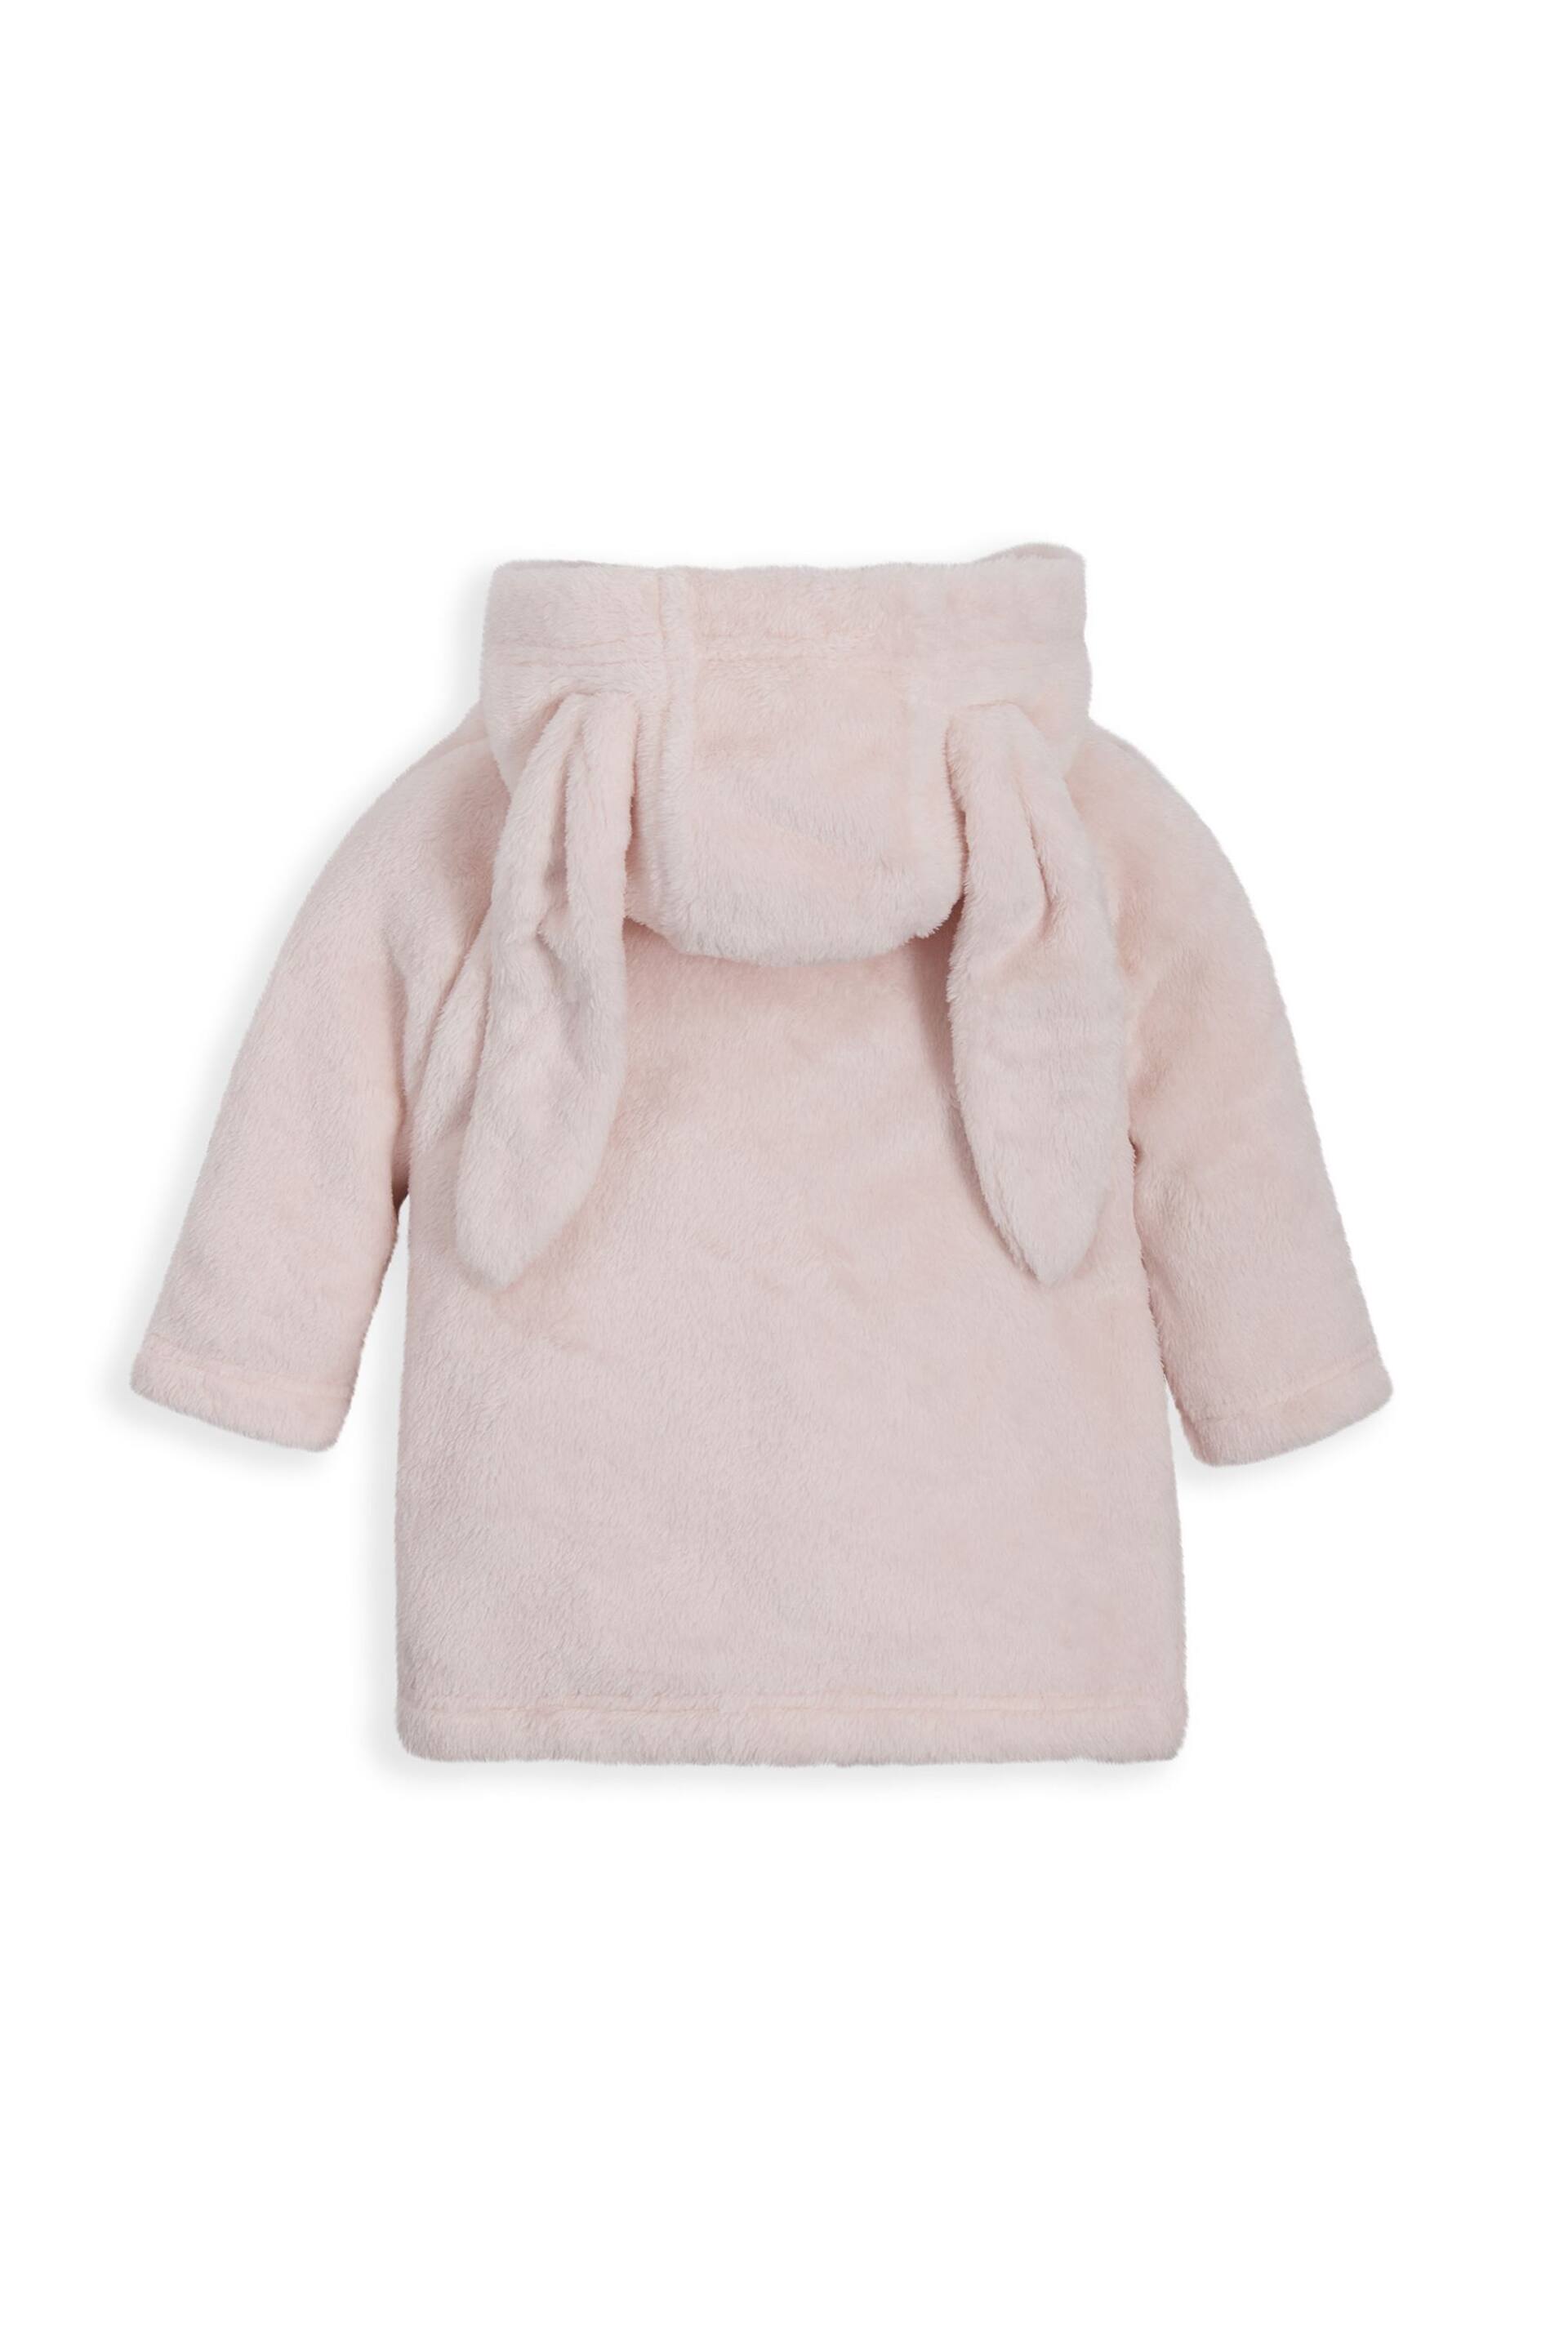 Mamas & Papas Pink Bunny Dressing Gown - Image 3 of 3